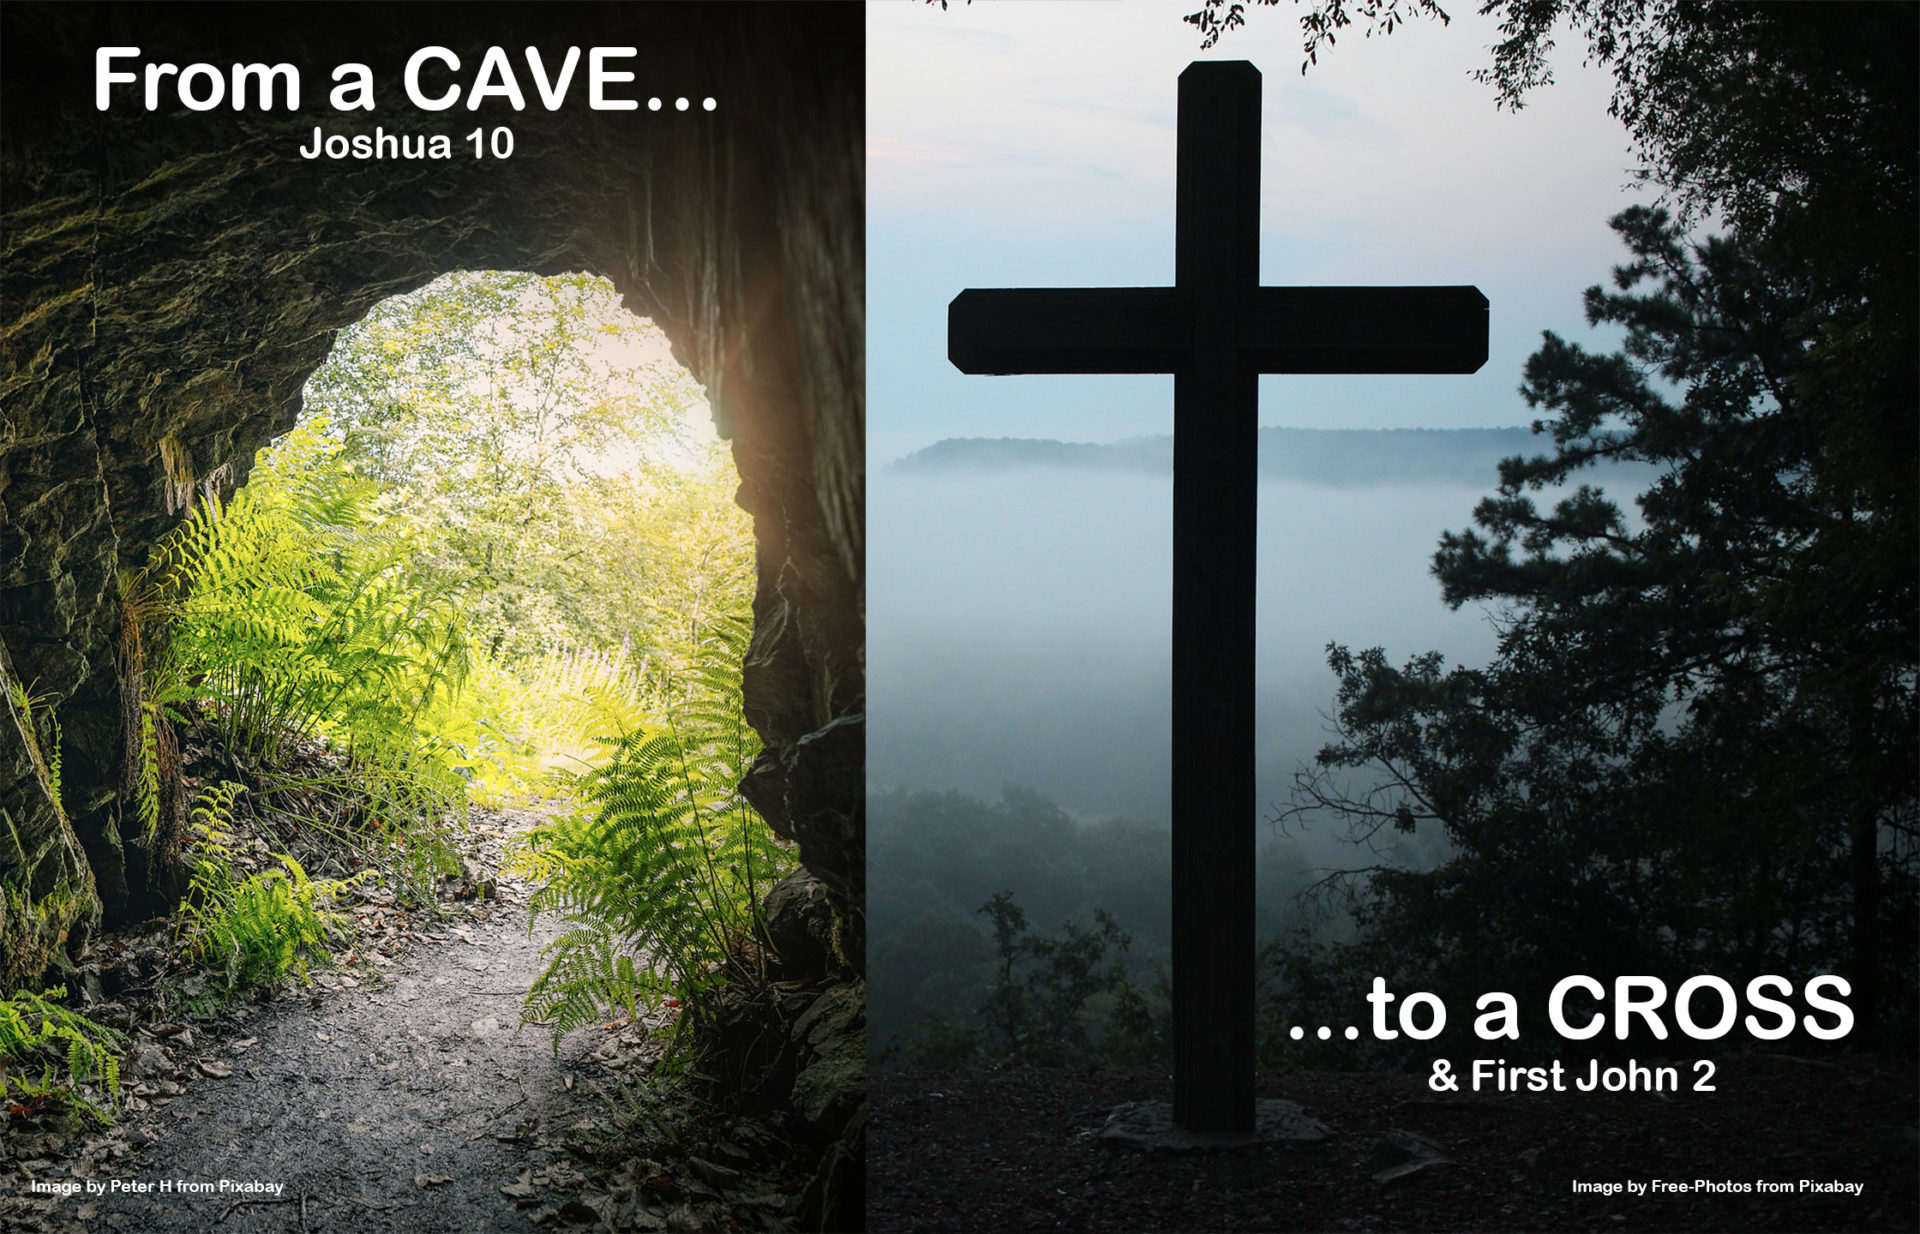 From a CAVE to a CROSS